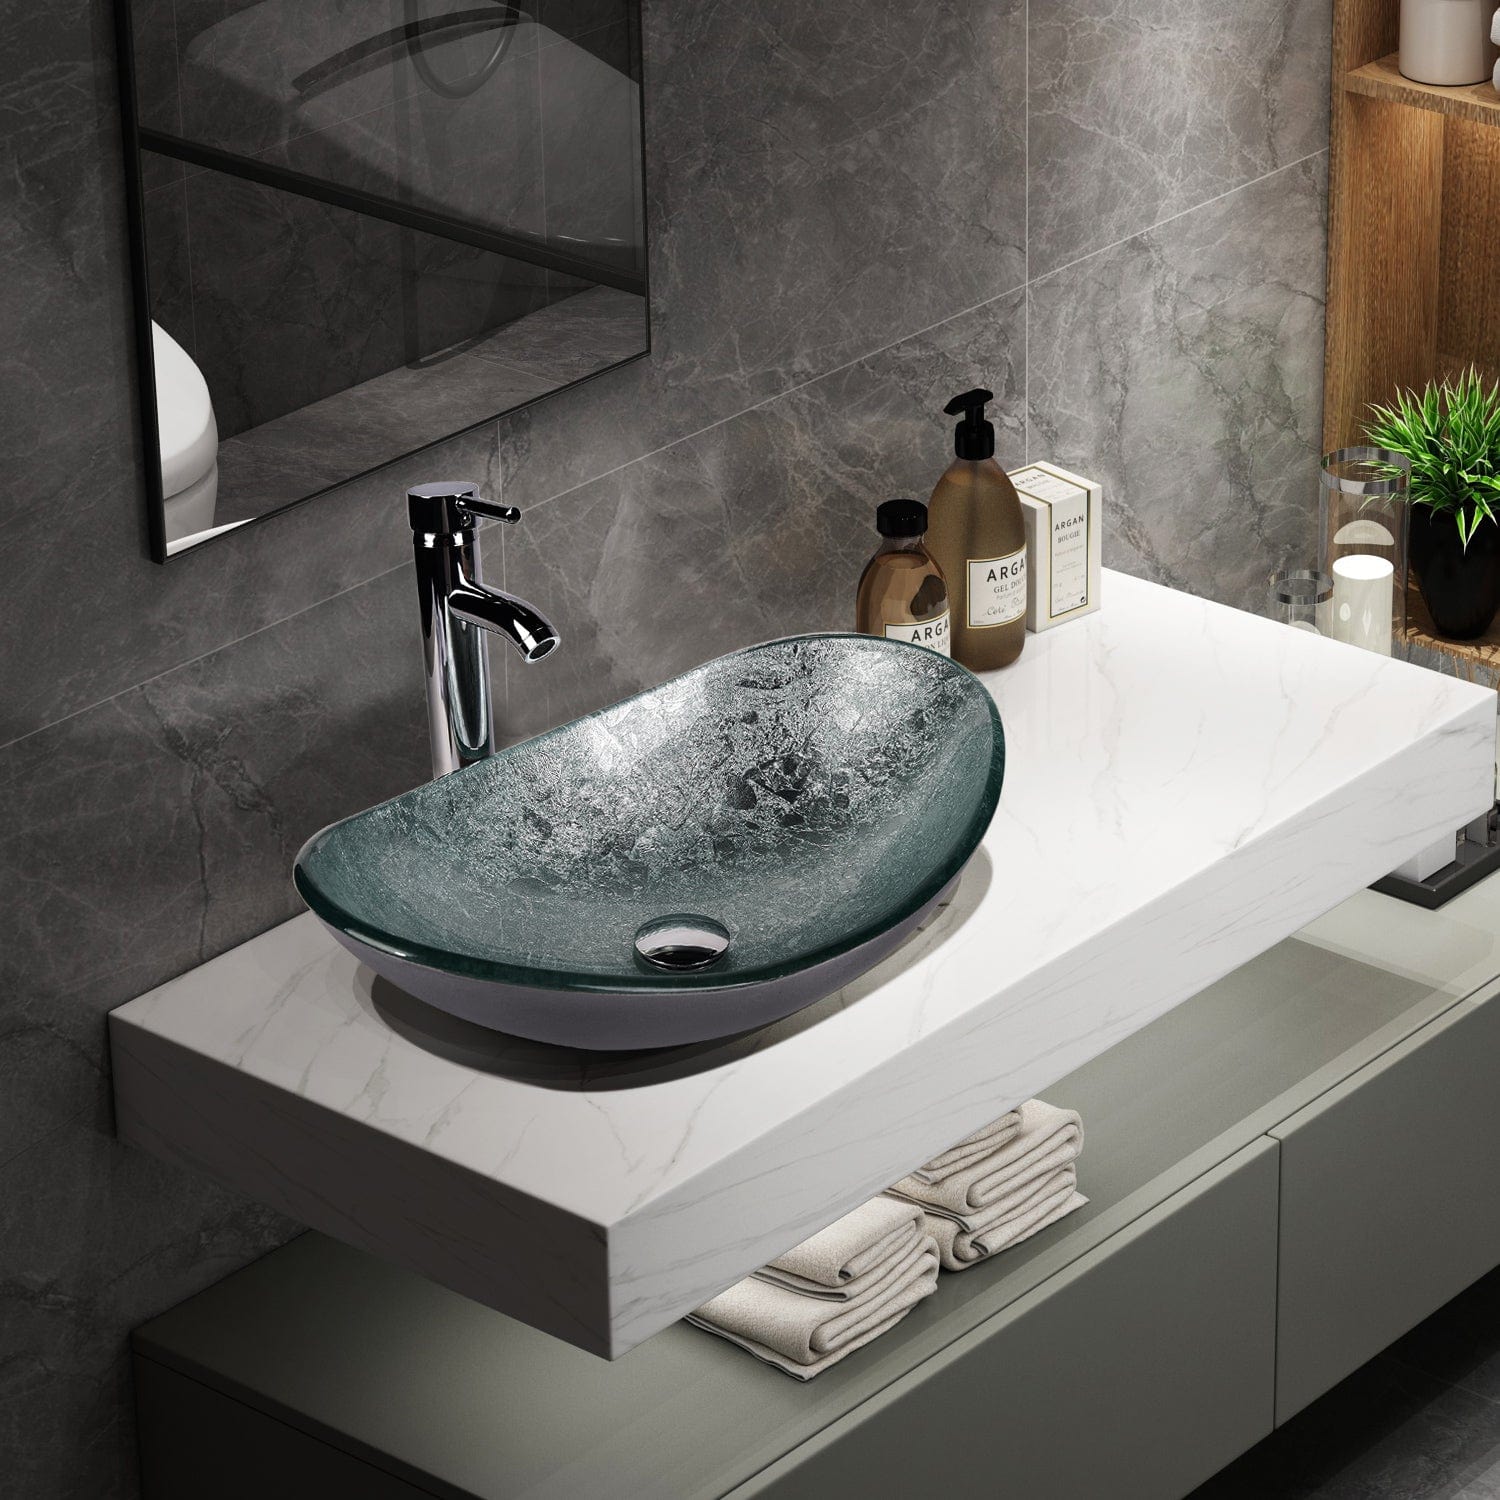 Elecwish Vessel Sinks Bathroom Artistic Glass Vessel Sink with Faucet Drain,Oval Silver displays in the bathroom